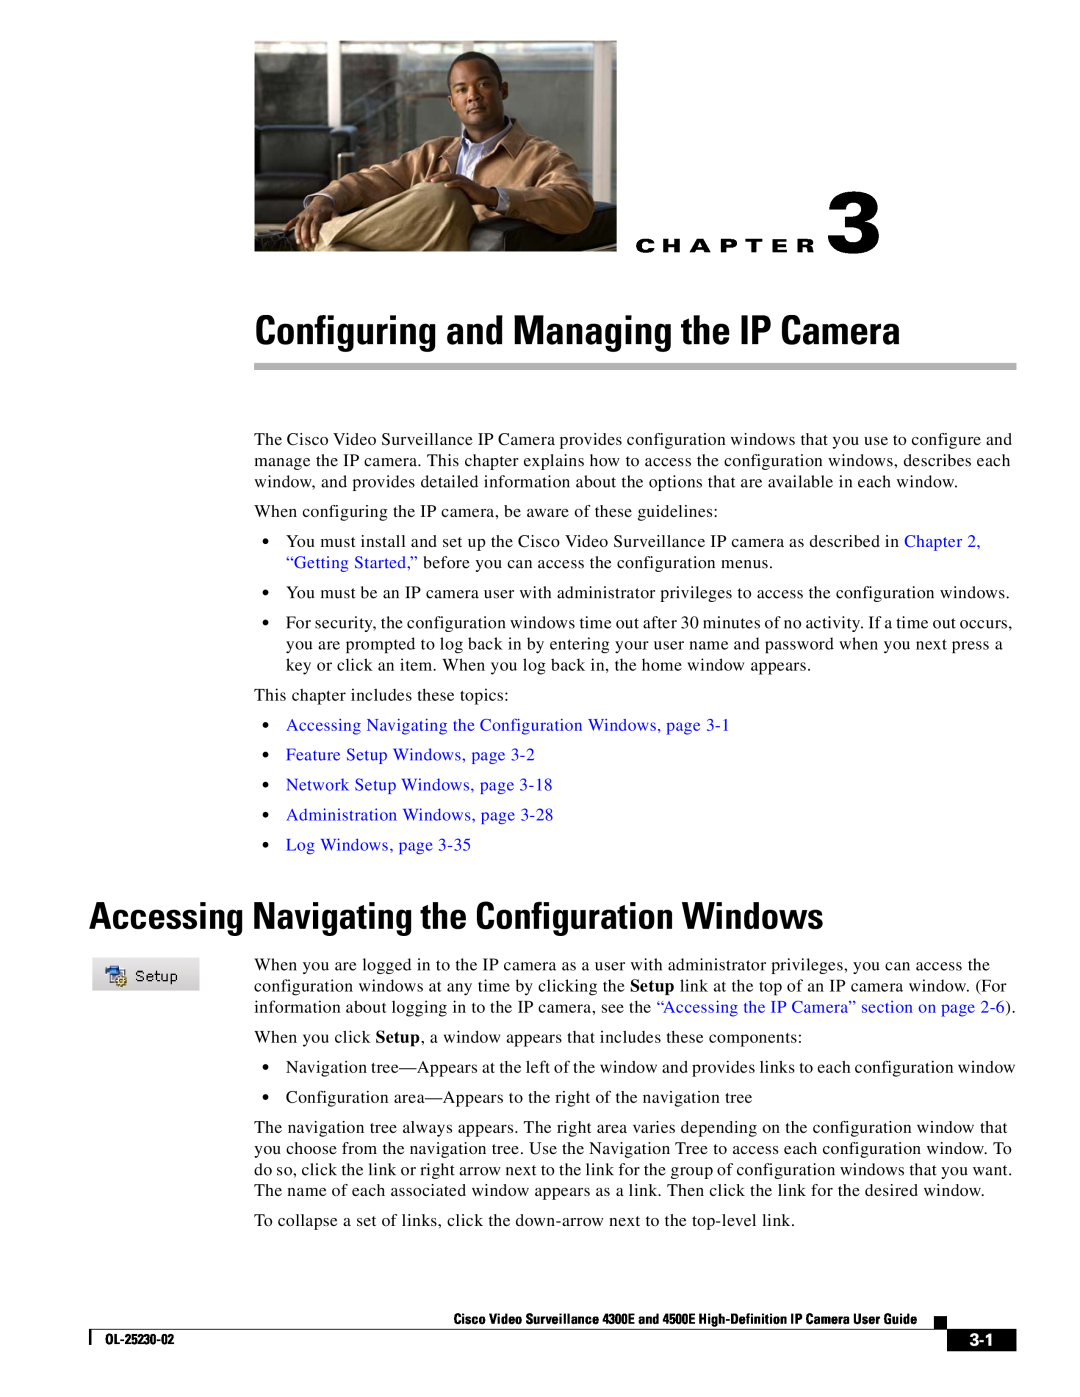 Cisco Systems 4500E Configuring and Managing the IP Camera, Accessing Navigating the Configuration Windows, C H A P T E R 